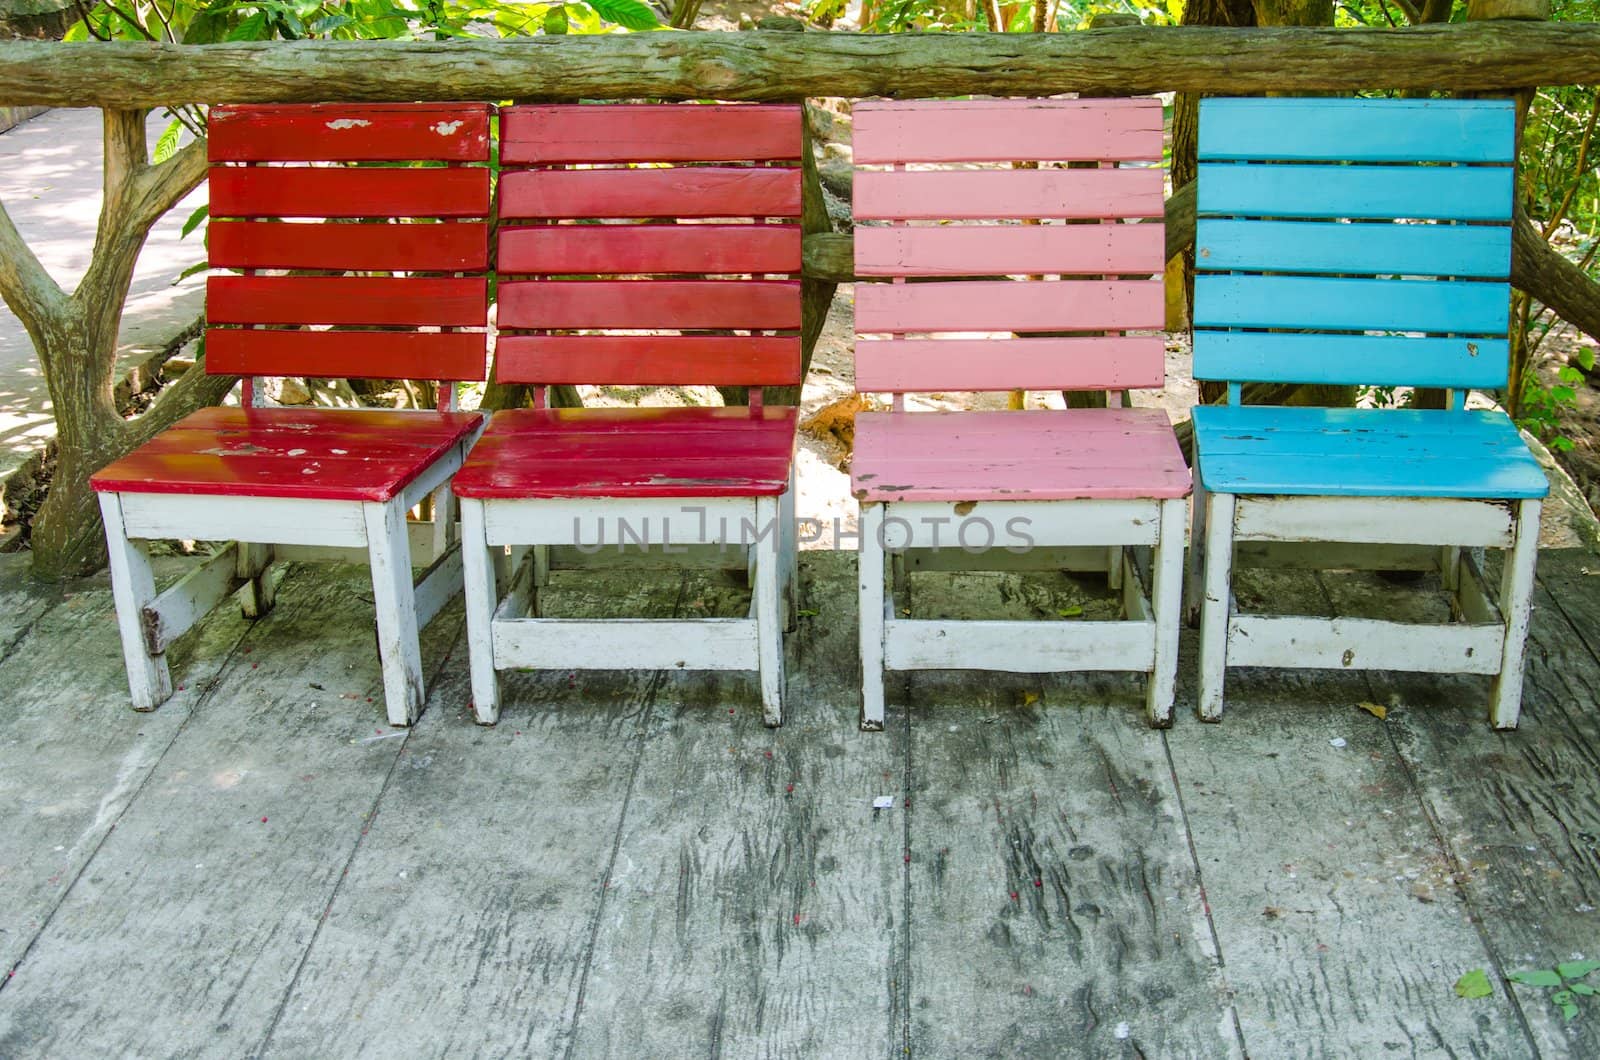 Chairs made ​​of wood put together a variety of colors.